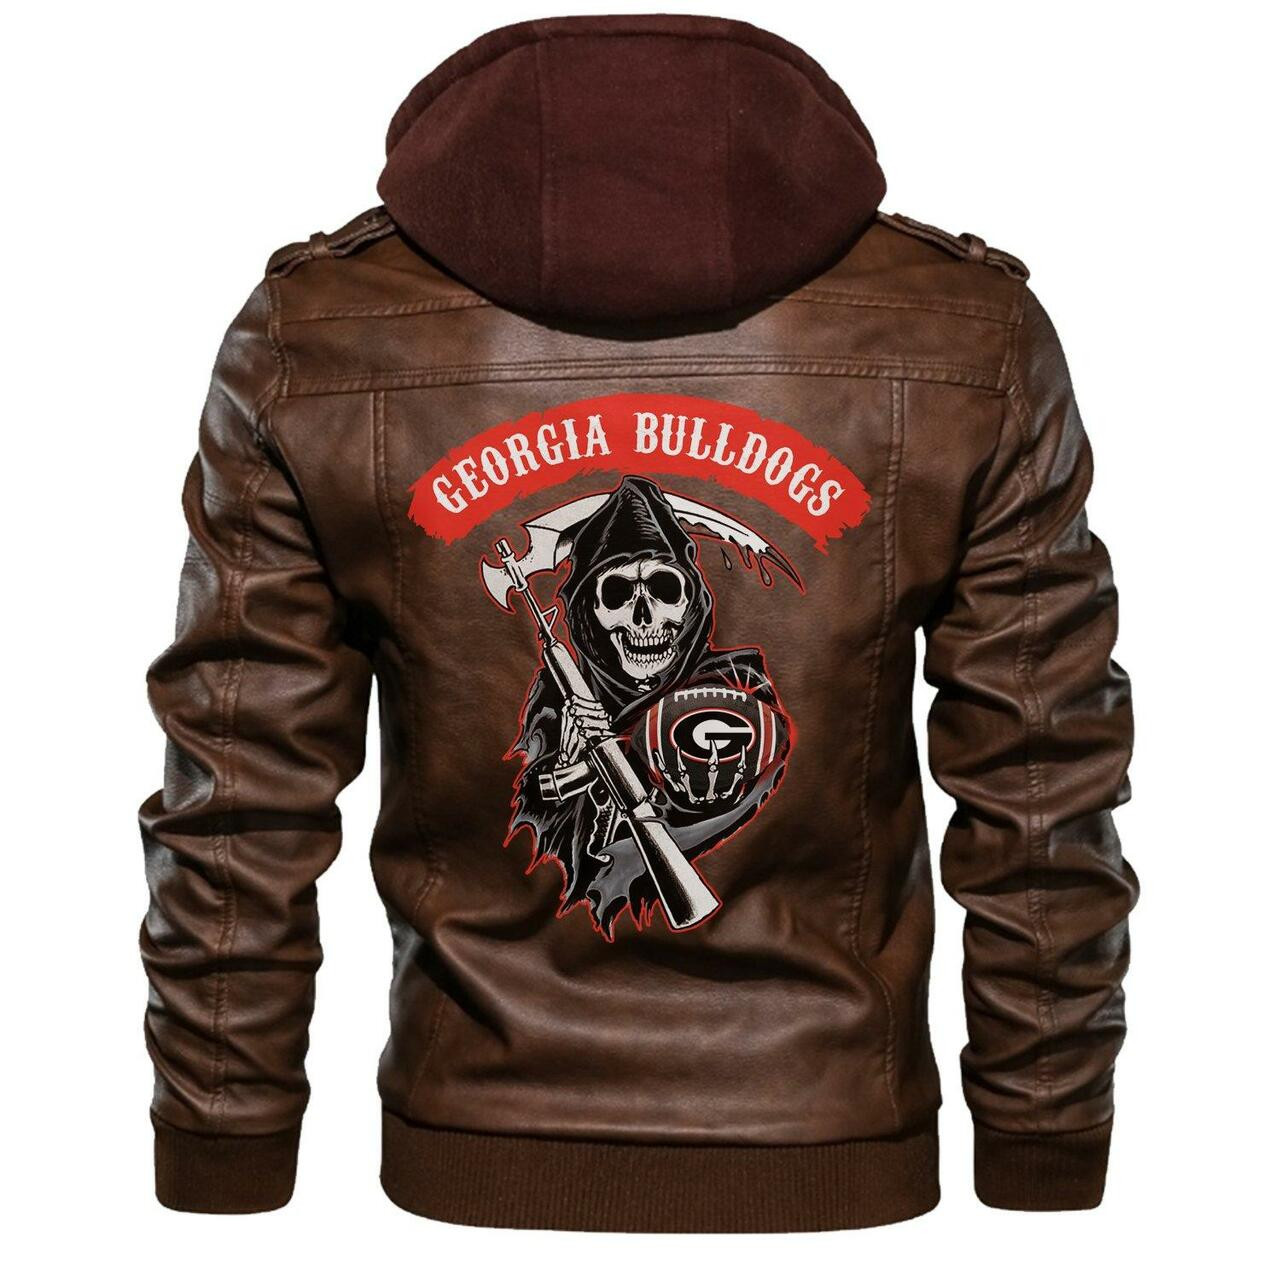 Are you looking for a great leather jacket? 126